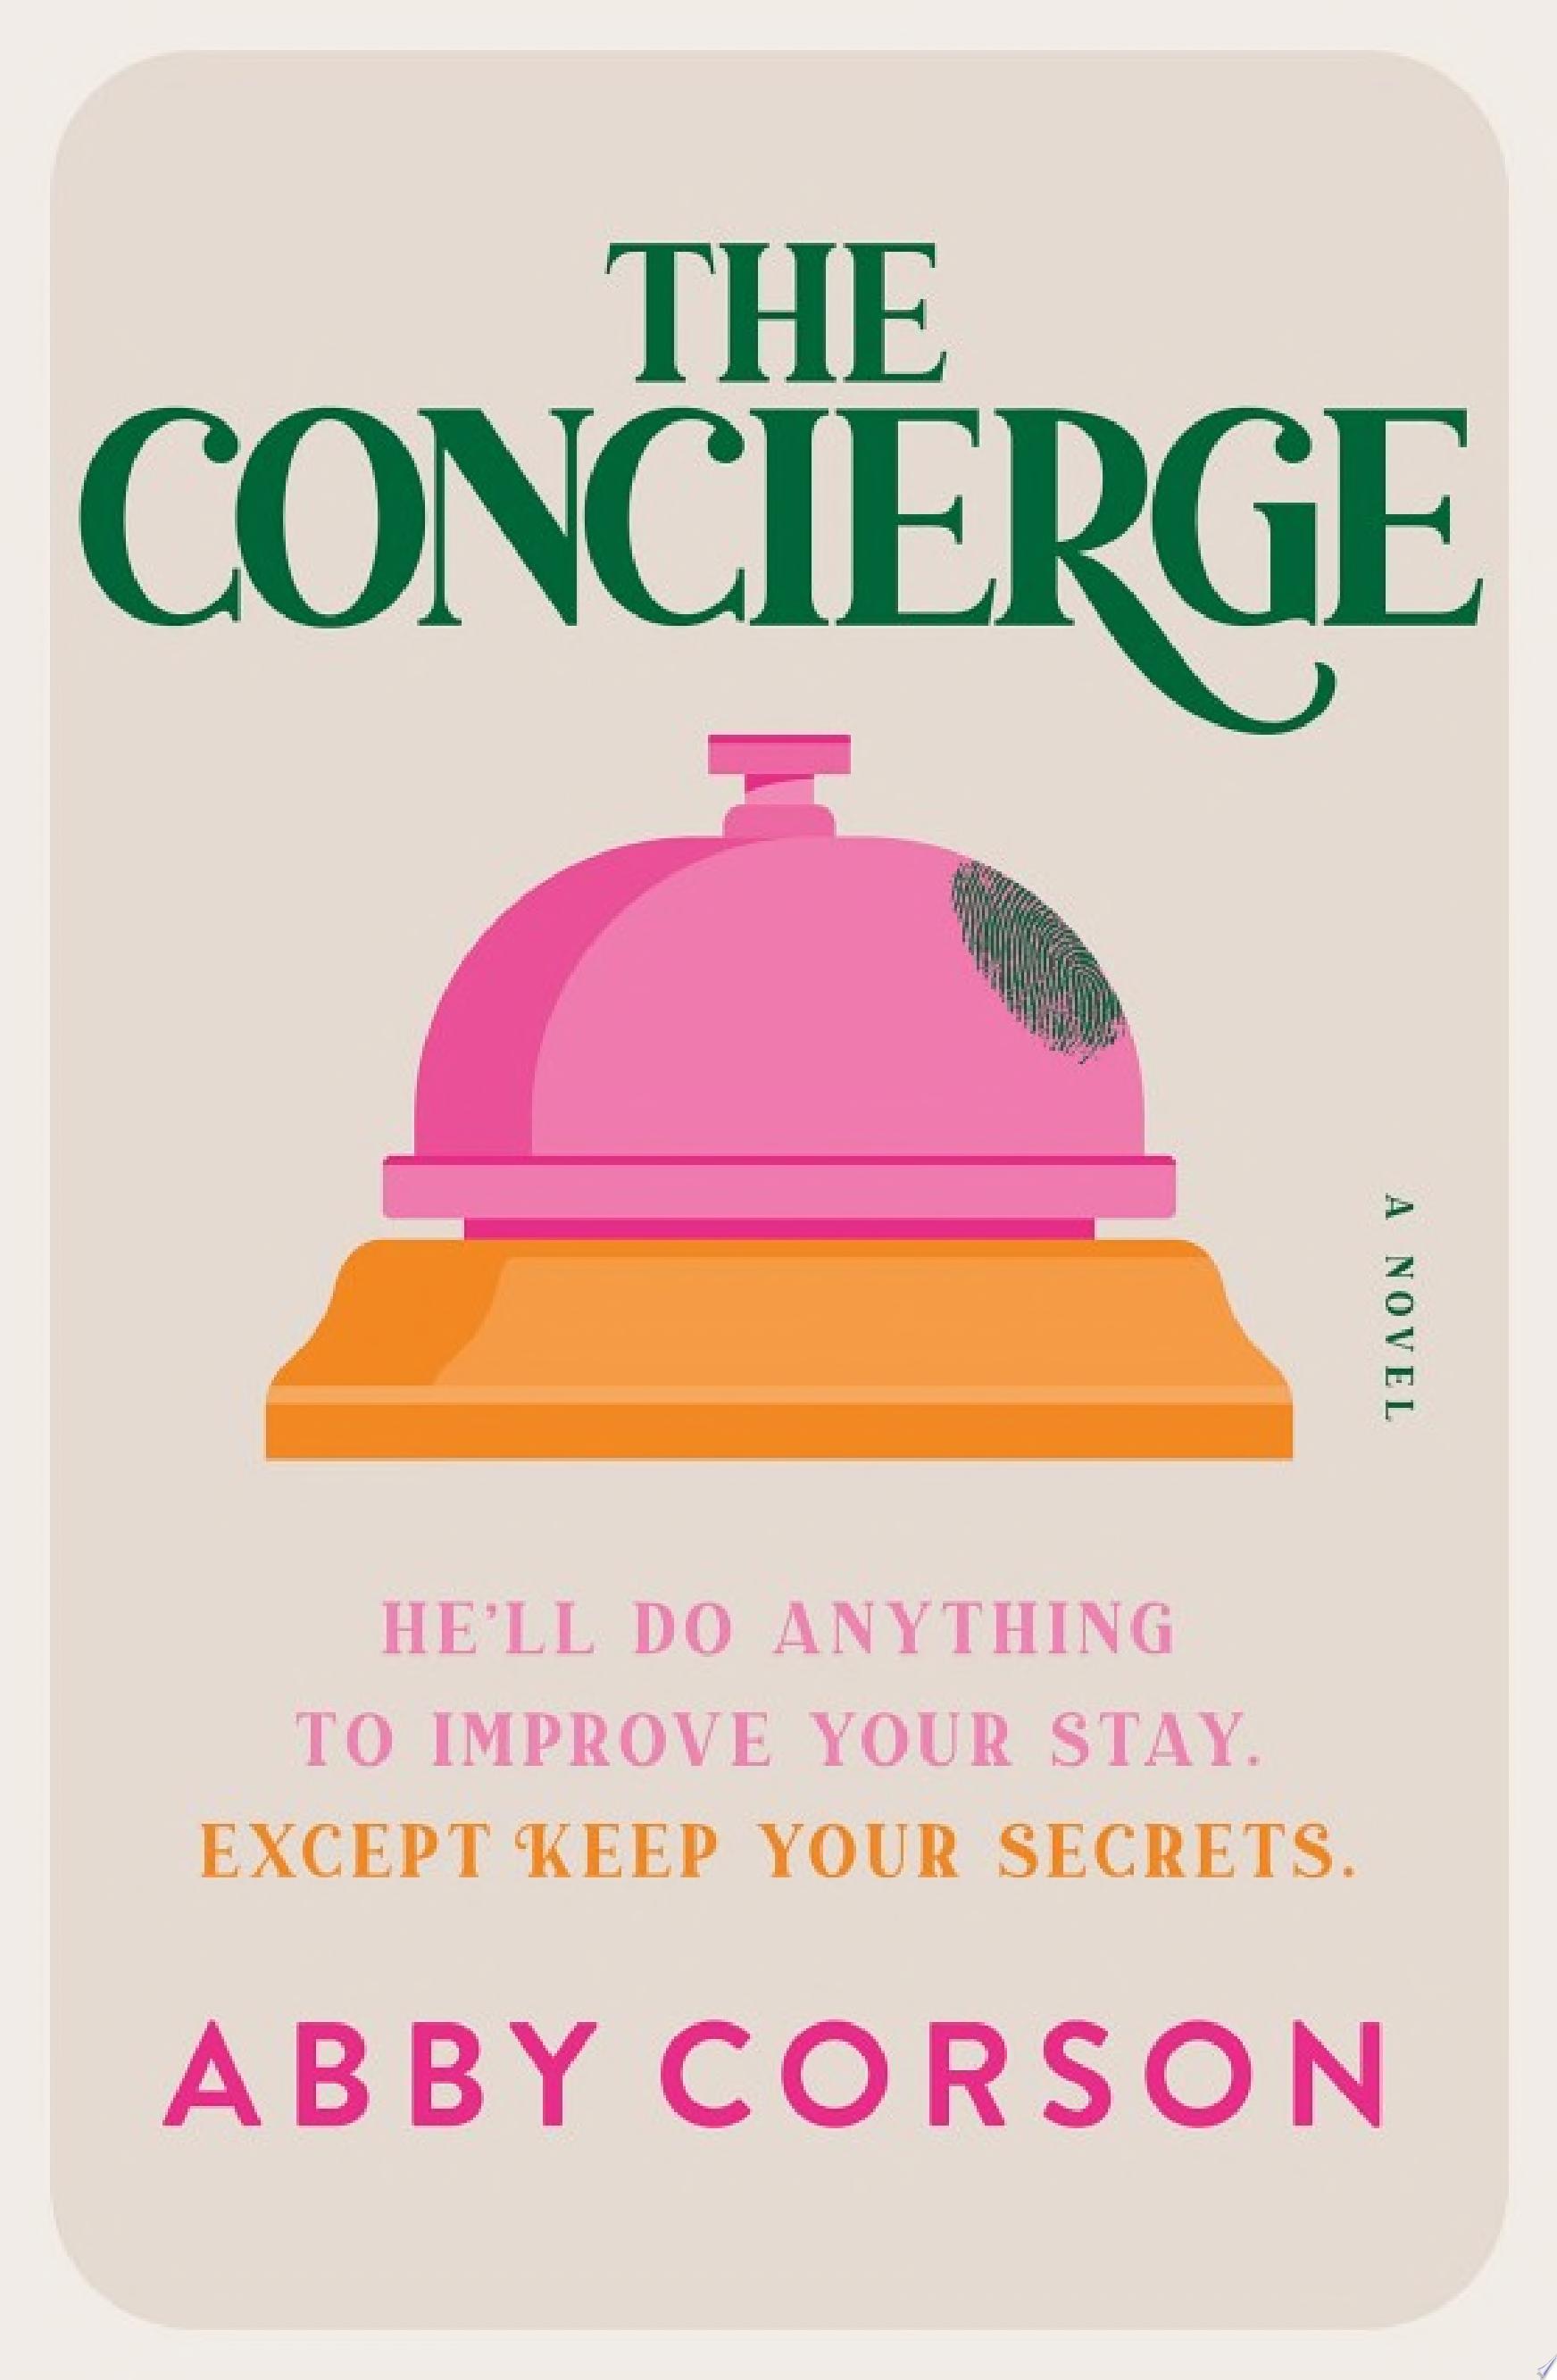 Image for "The Concierge"